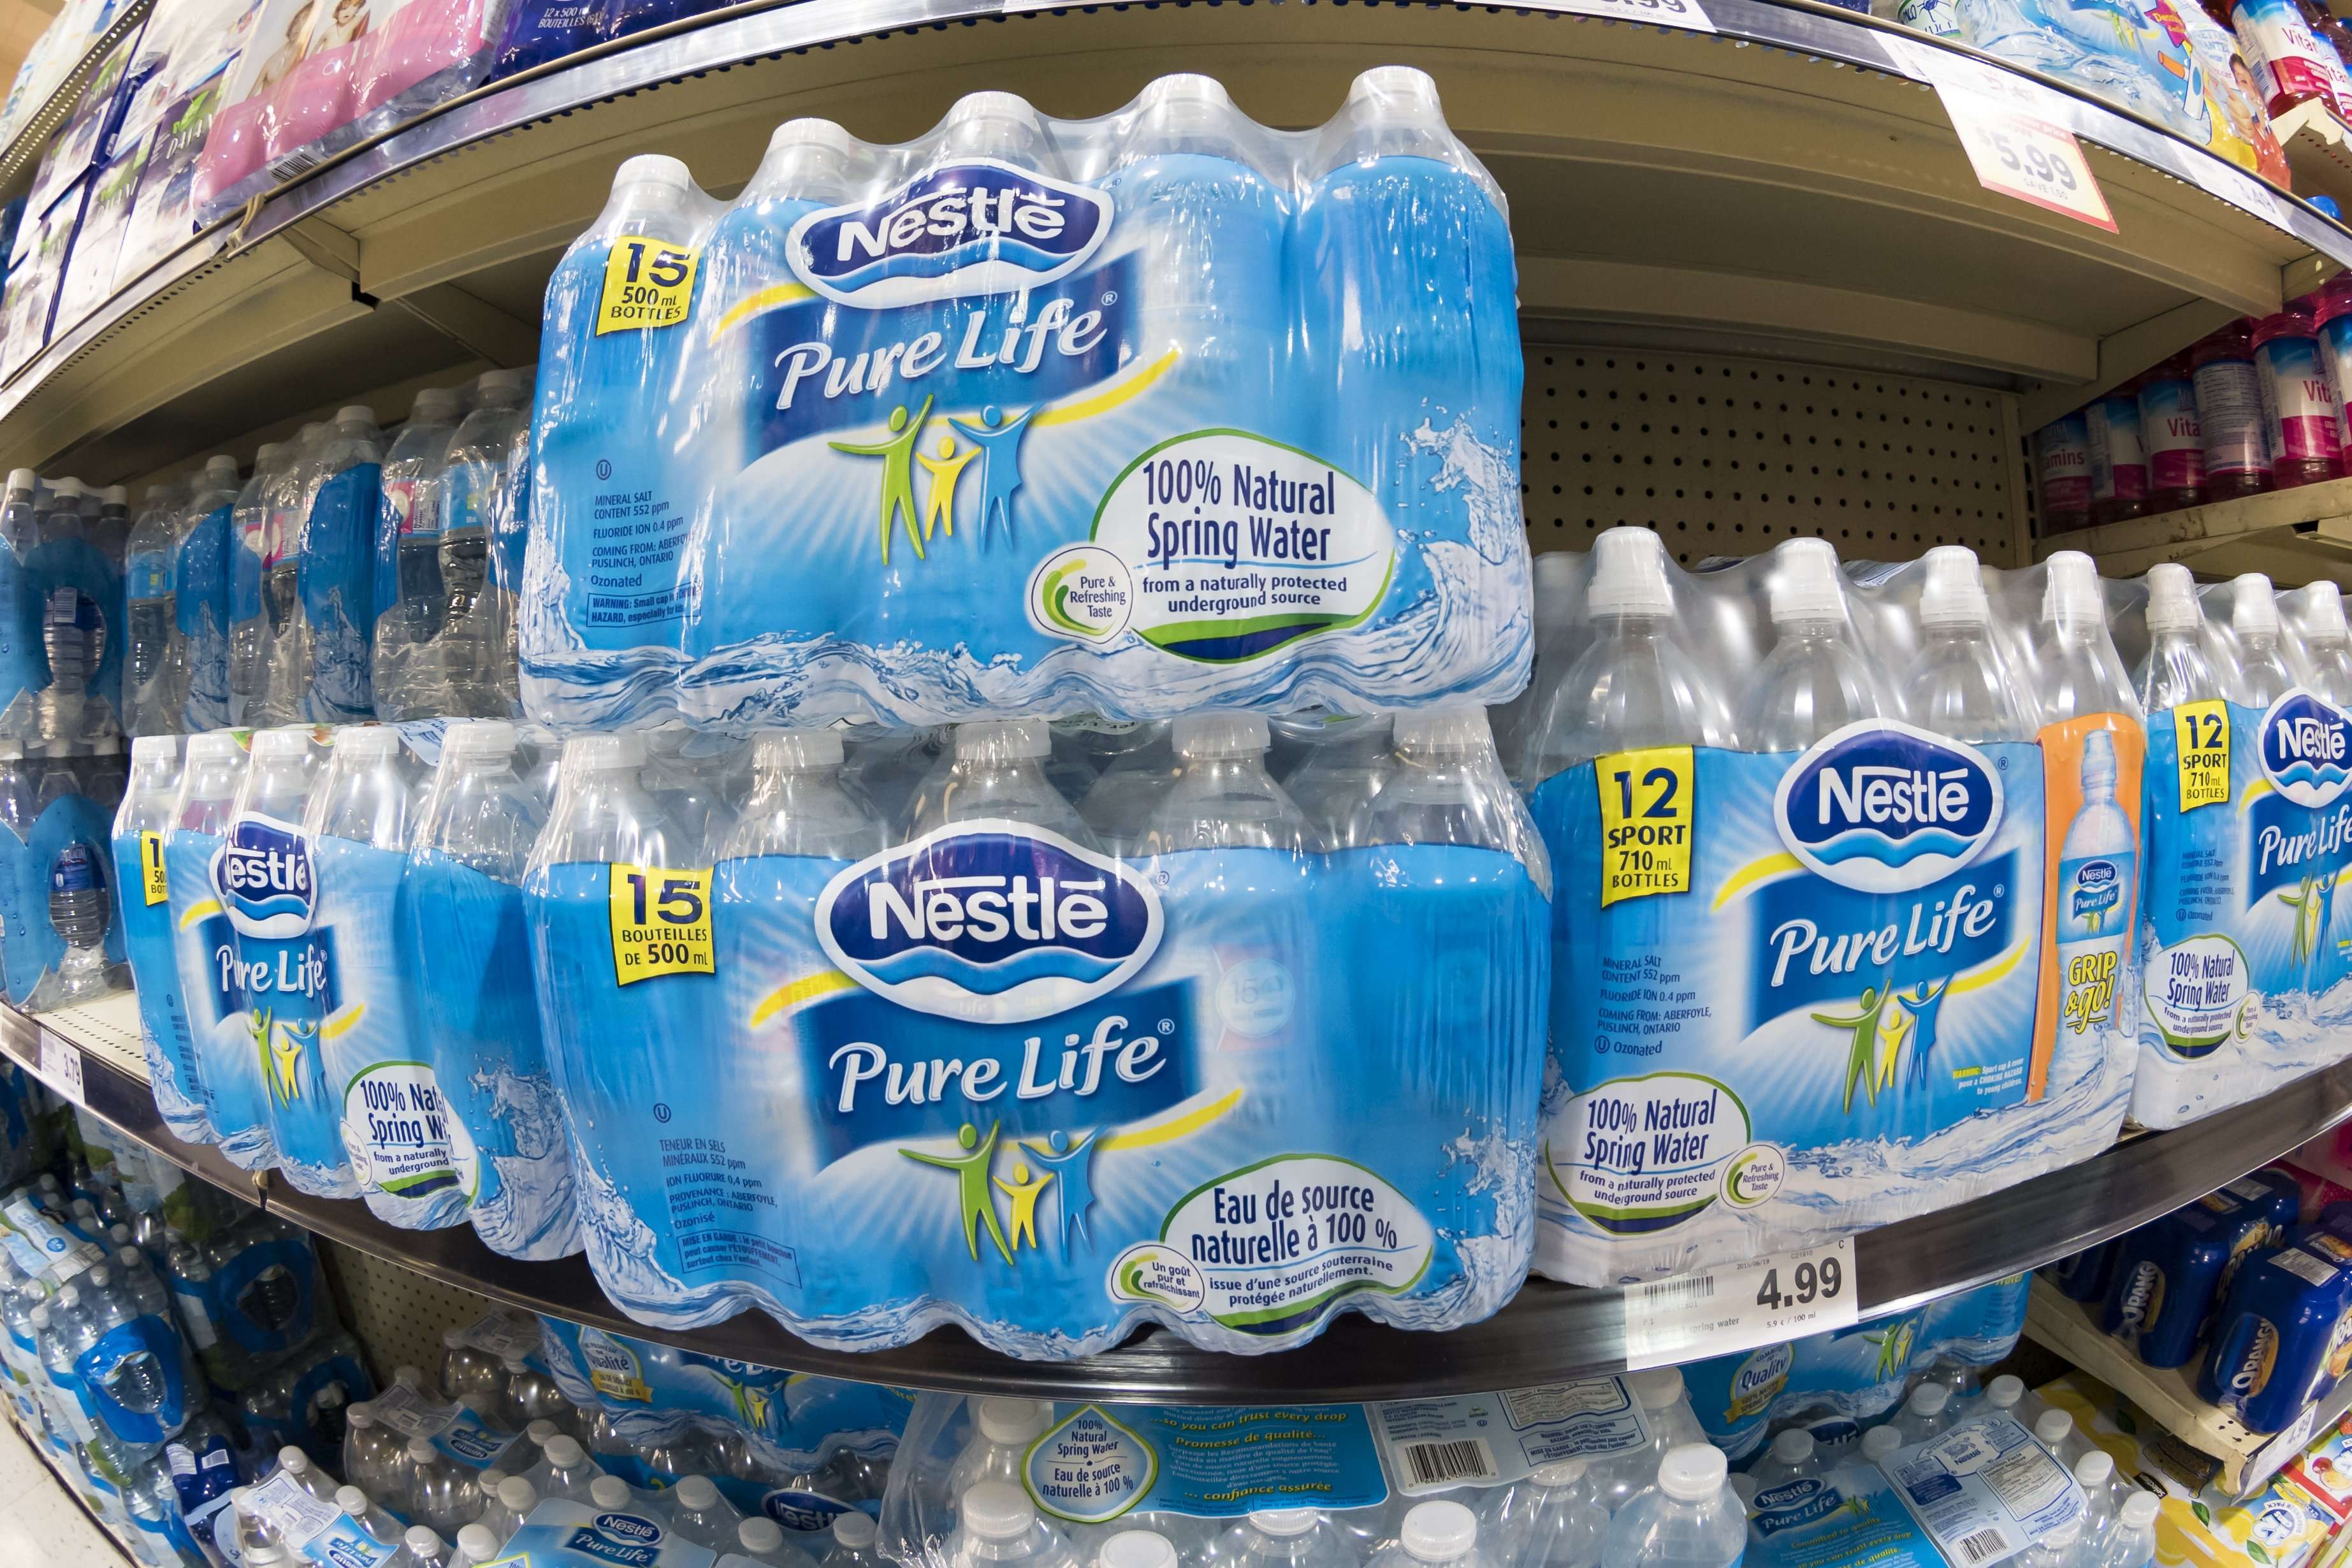 image for Nestlé Pays Only $200 to Take 130 Million Gallons of Michigan's Water